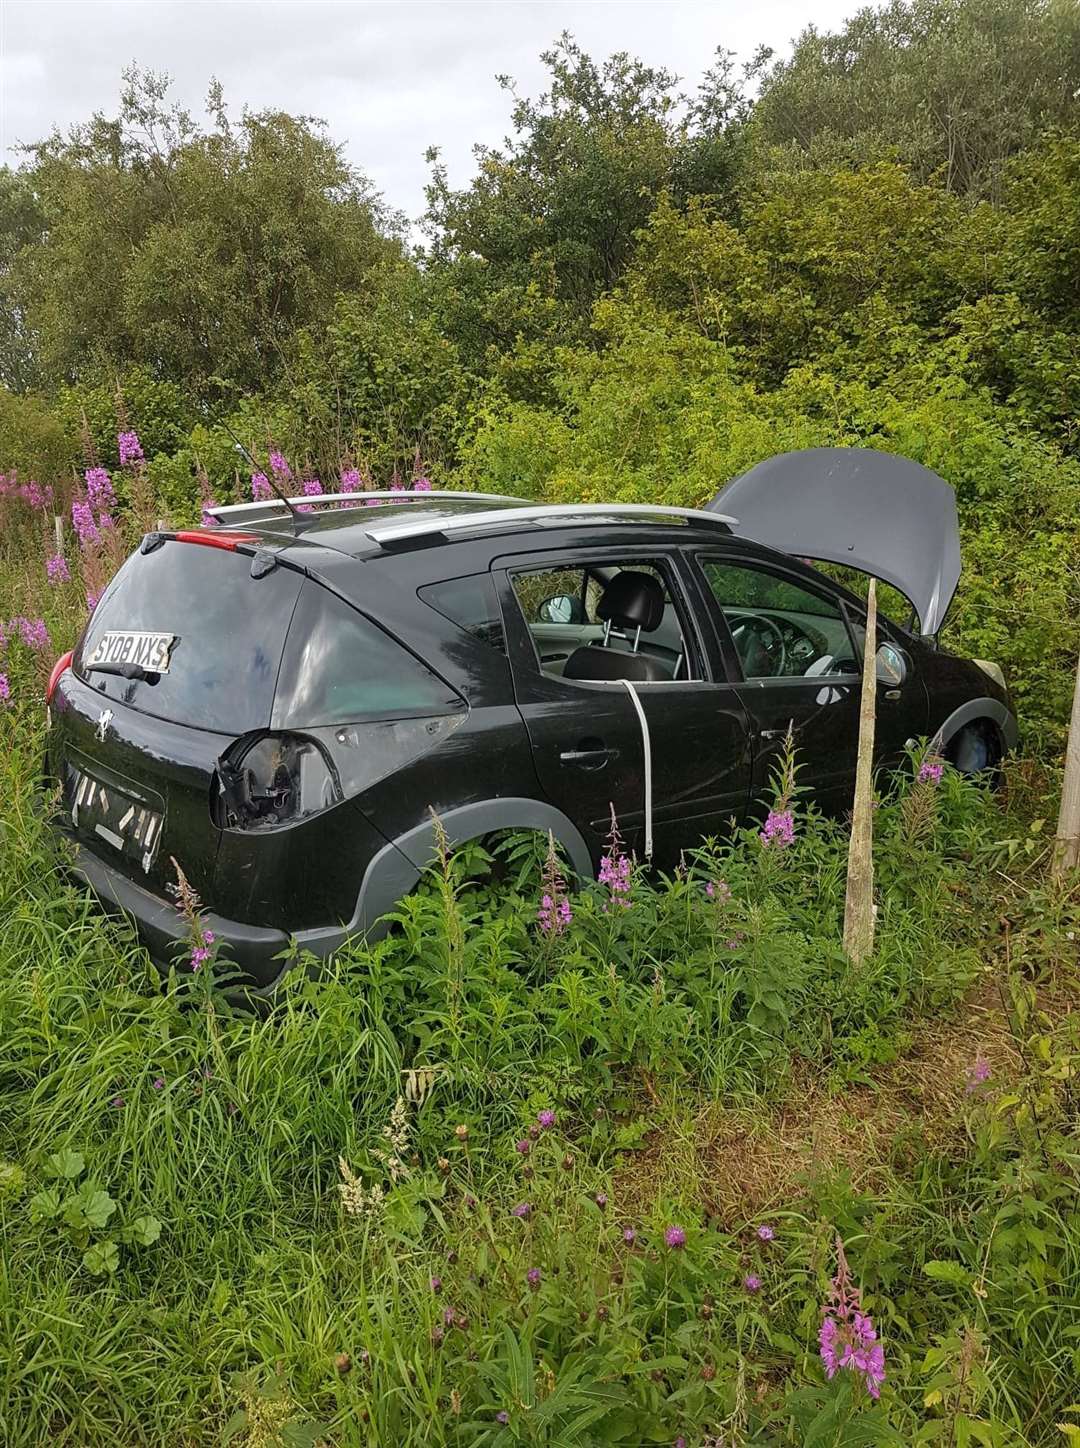 The car abandoned by the group of travellers in May.